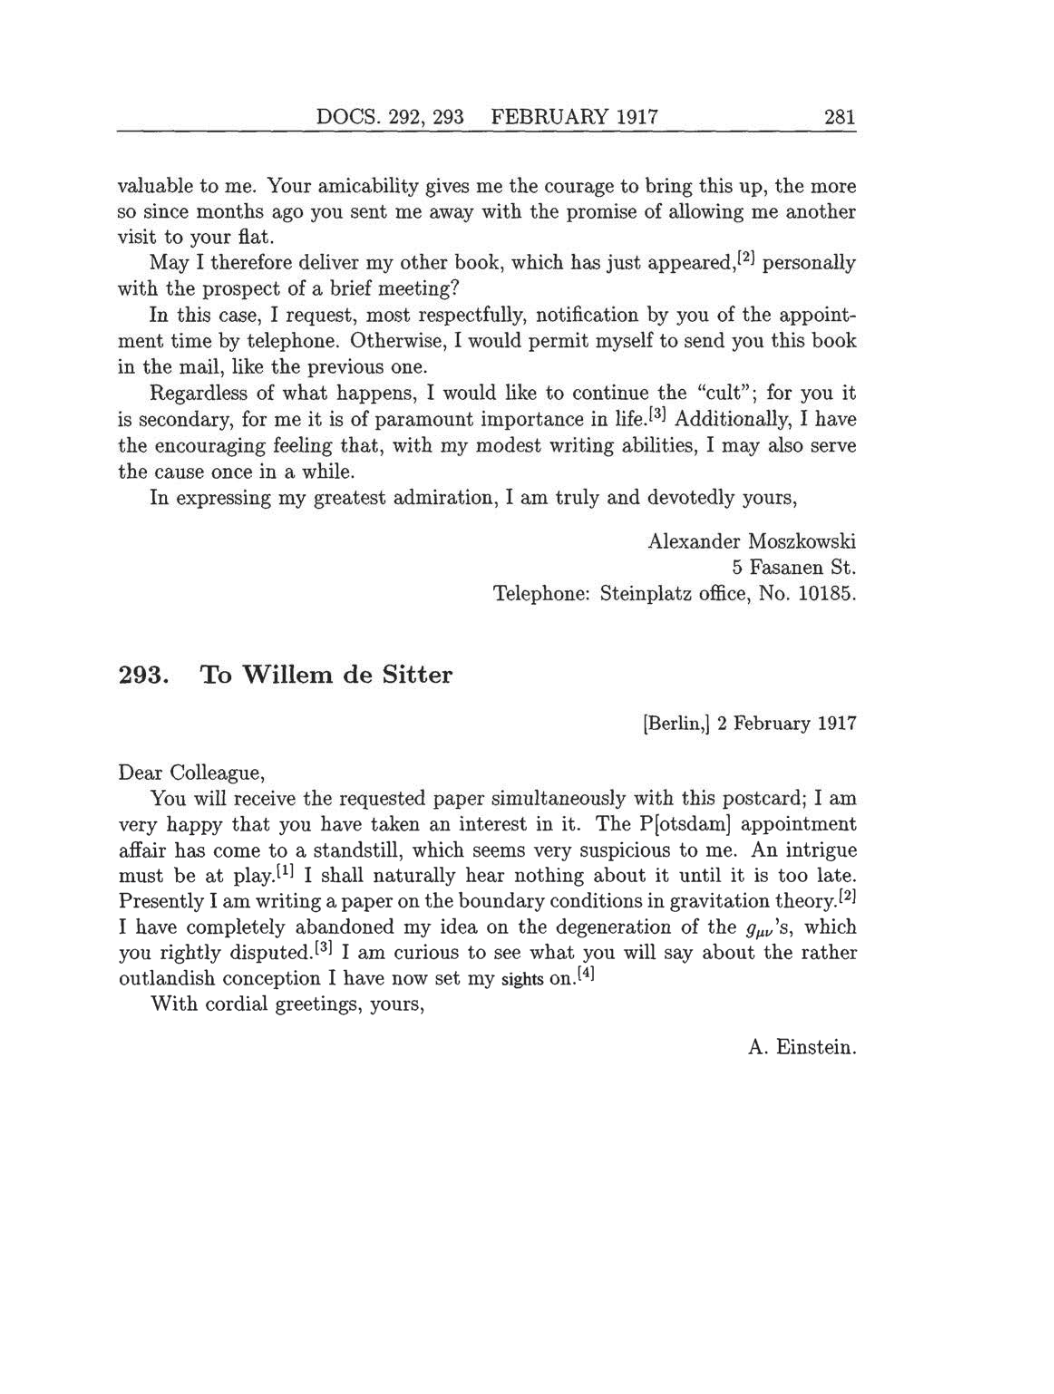 Volume 8: The Berlin Years: Correspondence, 1914-1918 (English translation supplement) page 281